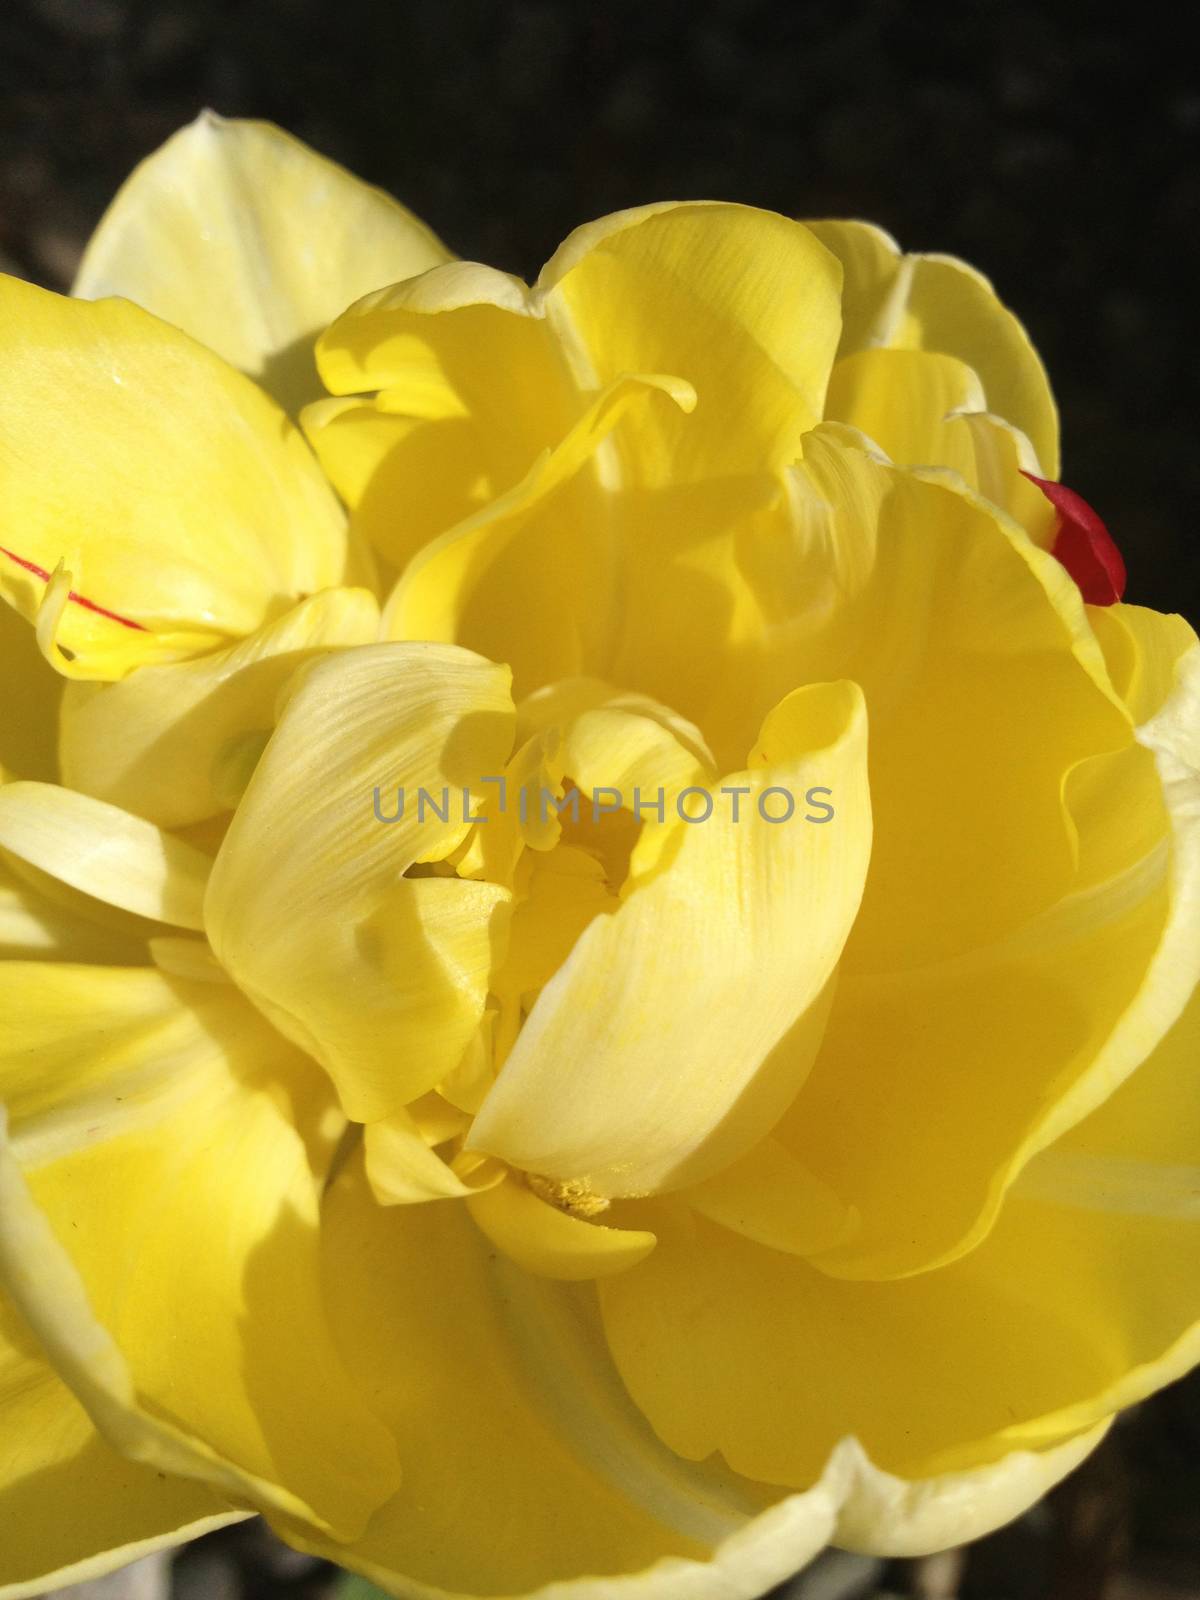 Extreme close up of a yellow tulip flower 